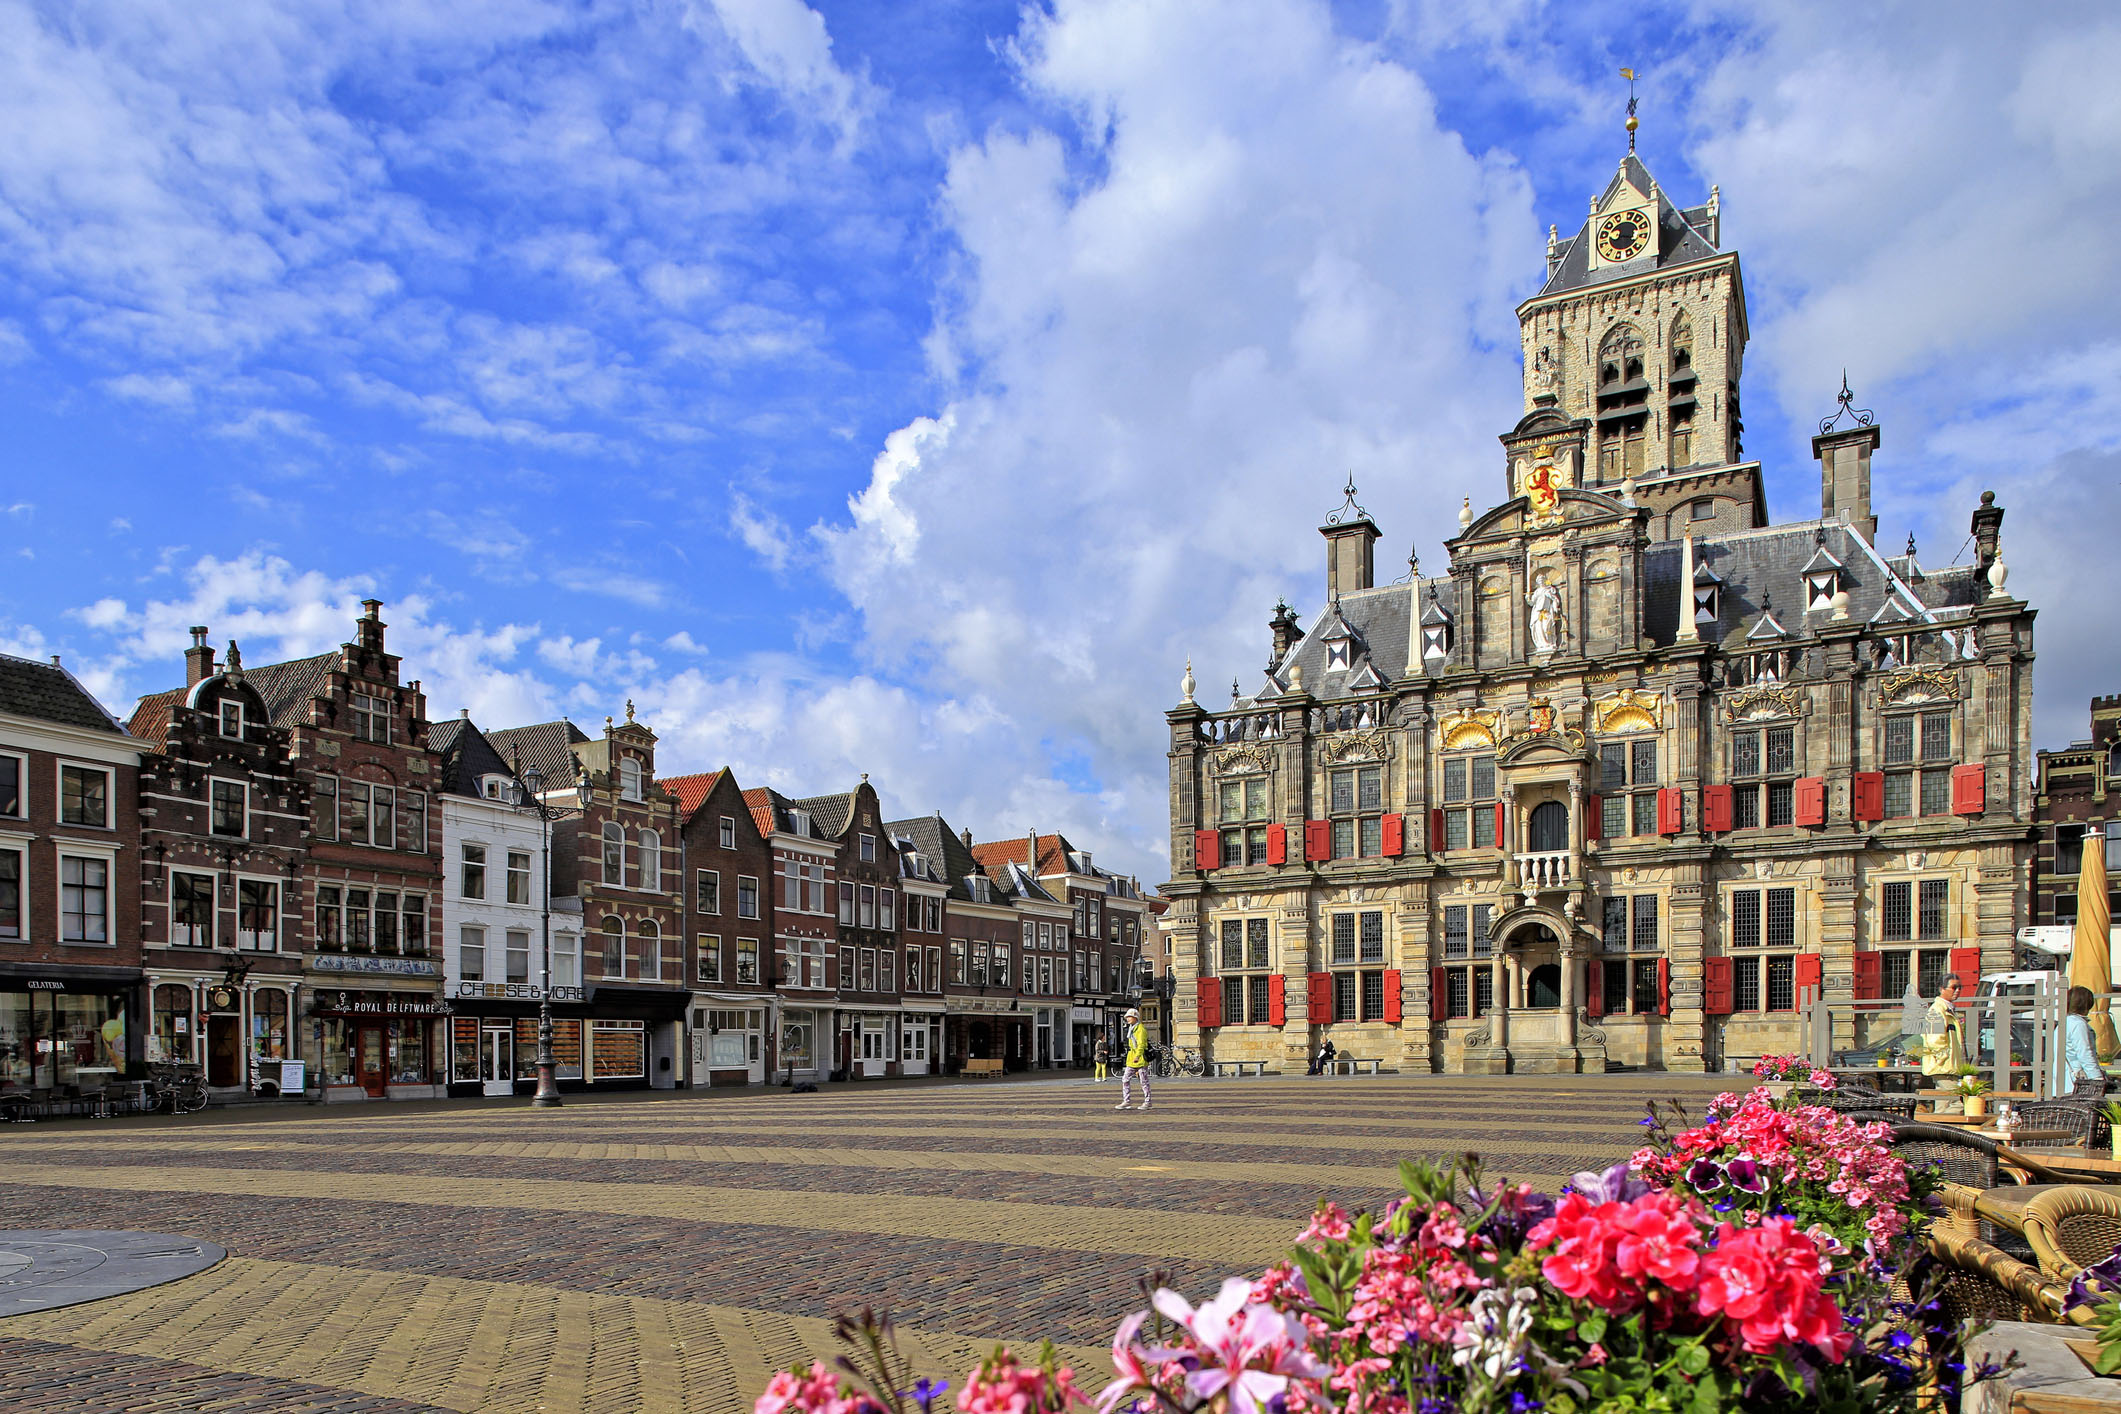 View of the marketplace in Delft